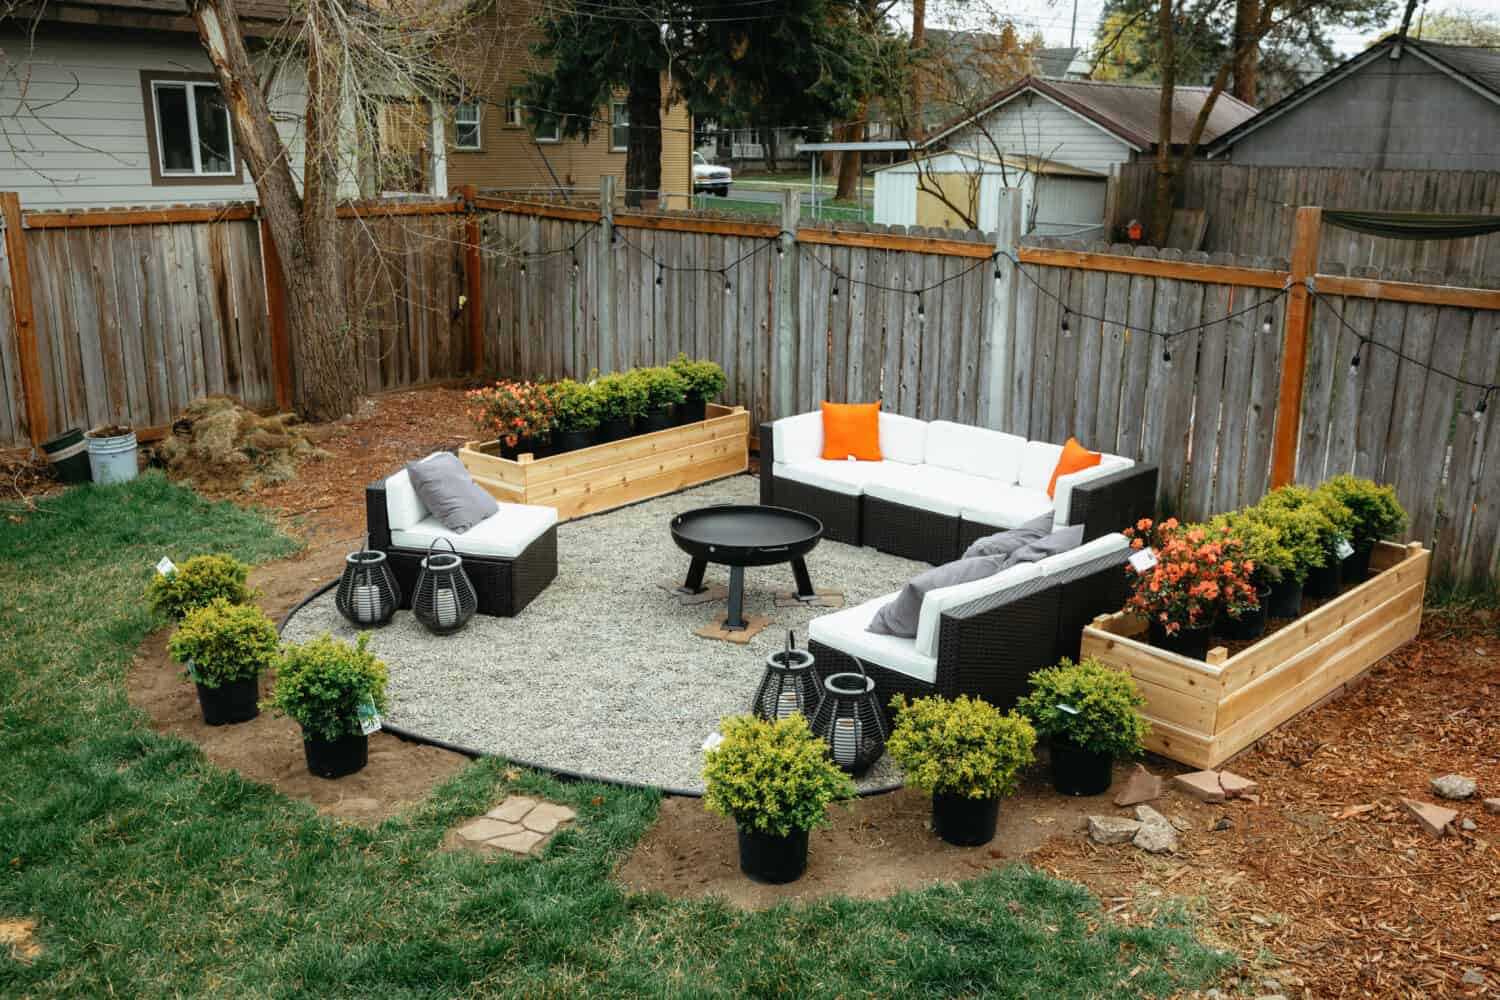 Low Budget Backyard Fire Pit, How Much Does It Cost To Build A Fire Pit Area